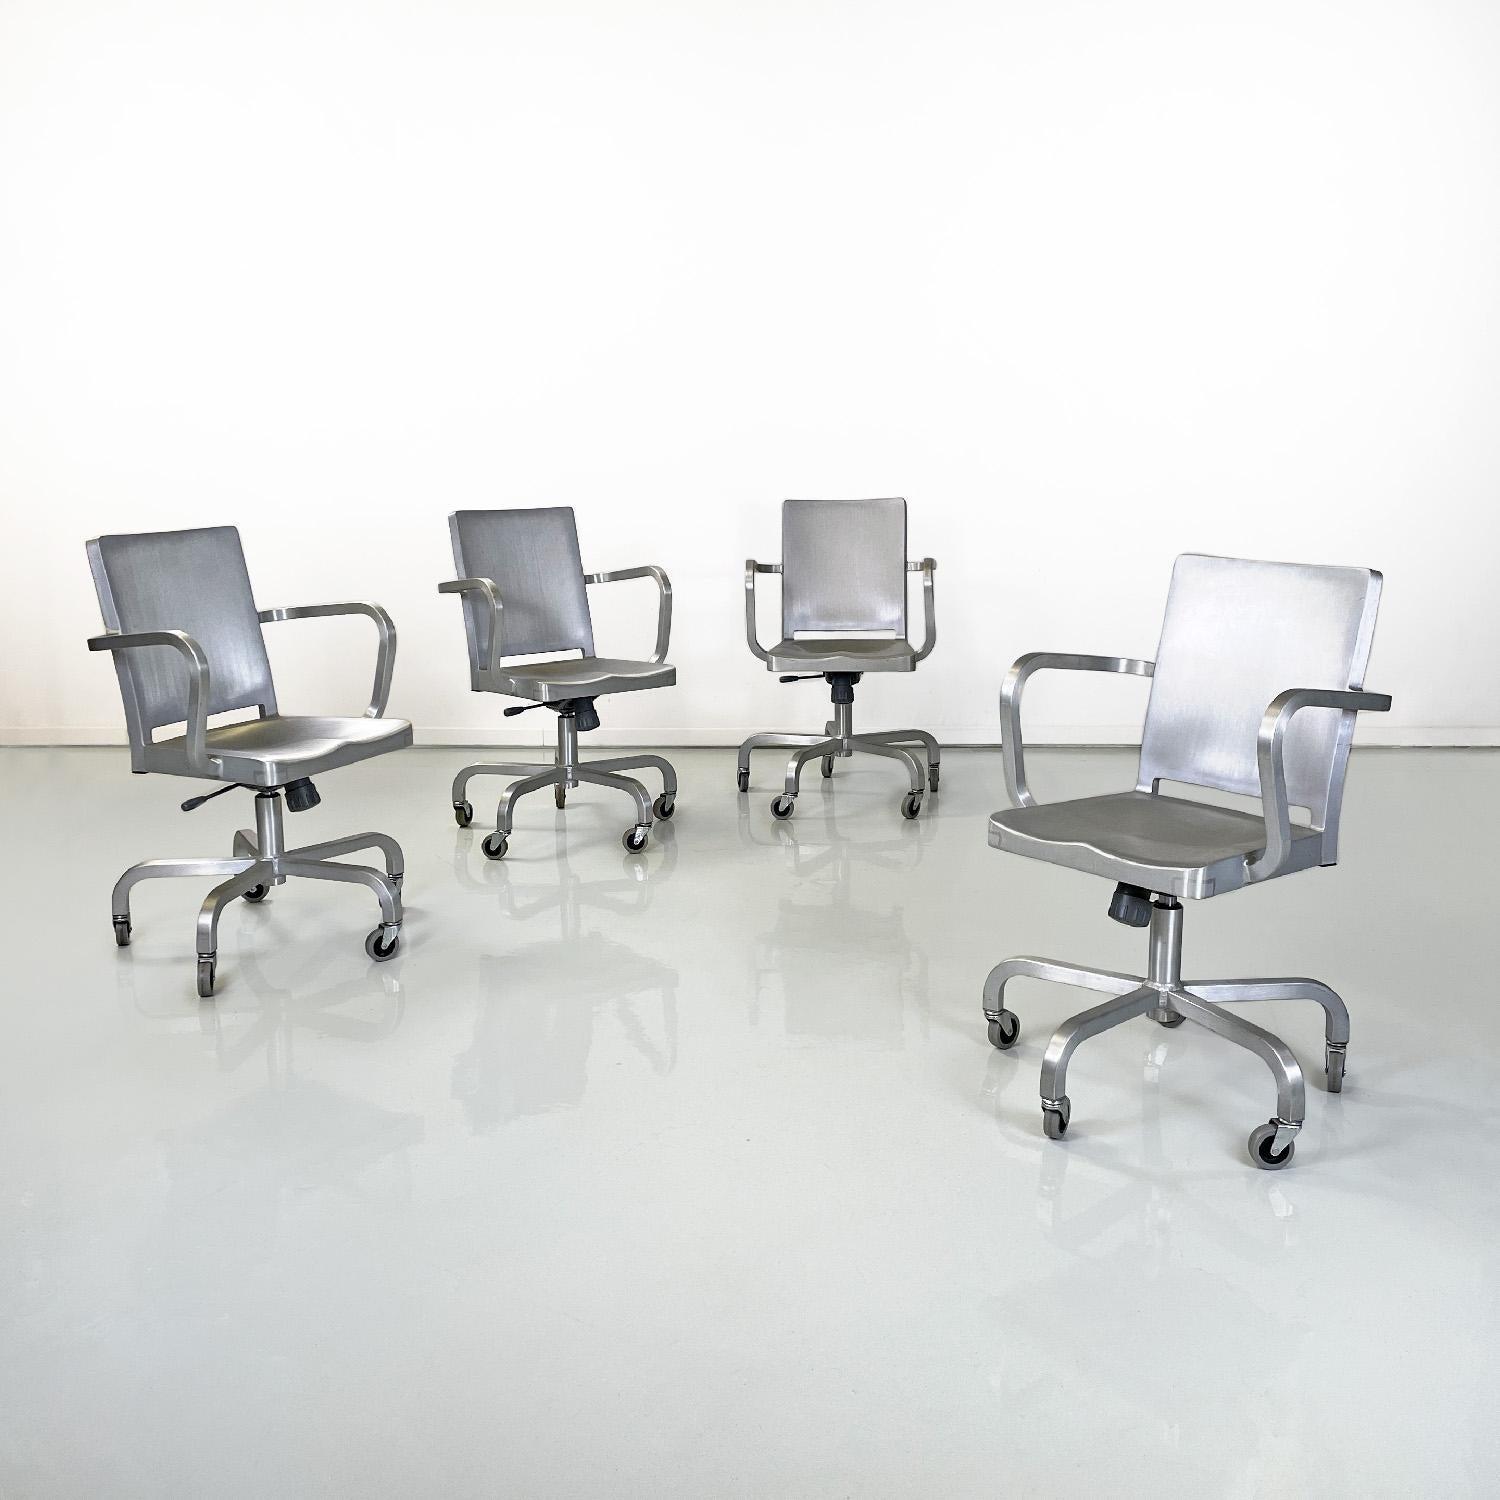 American modern swivel chairs Hudson brushed aluminum by Starck for Emeco, 2000
Set of four chairs mod. Hudson entirely in brushed aluminum. The backrest and seat are slightly shaped, it has two curved armrests. Extending from the central stem are